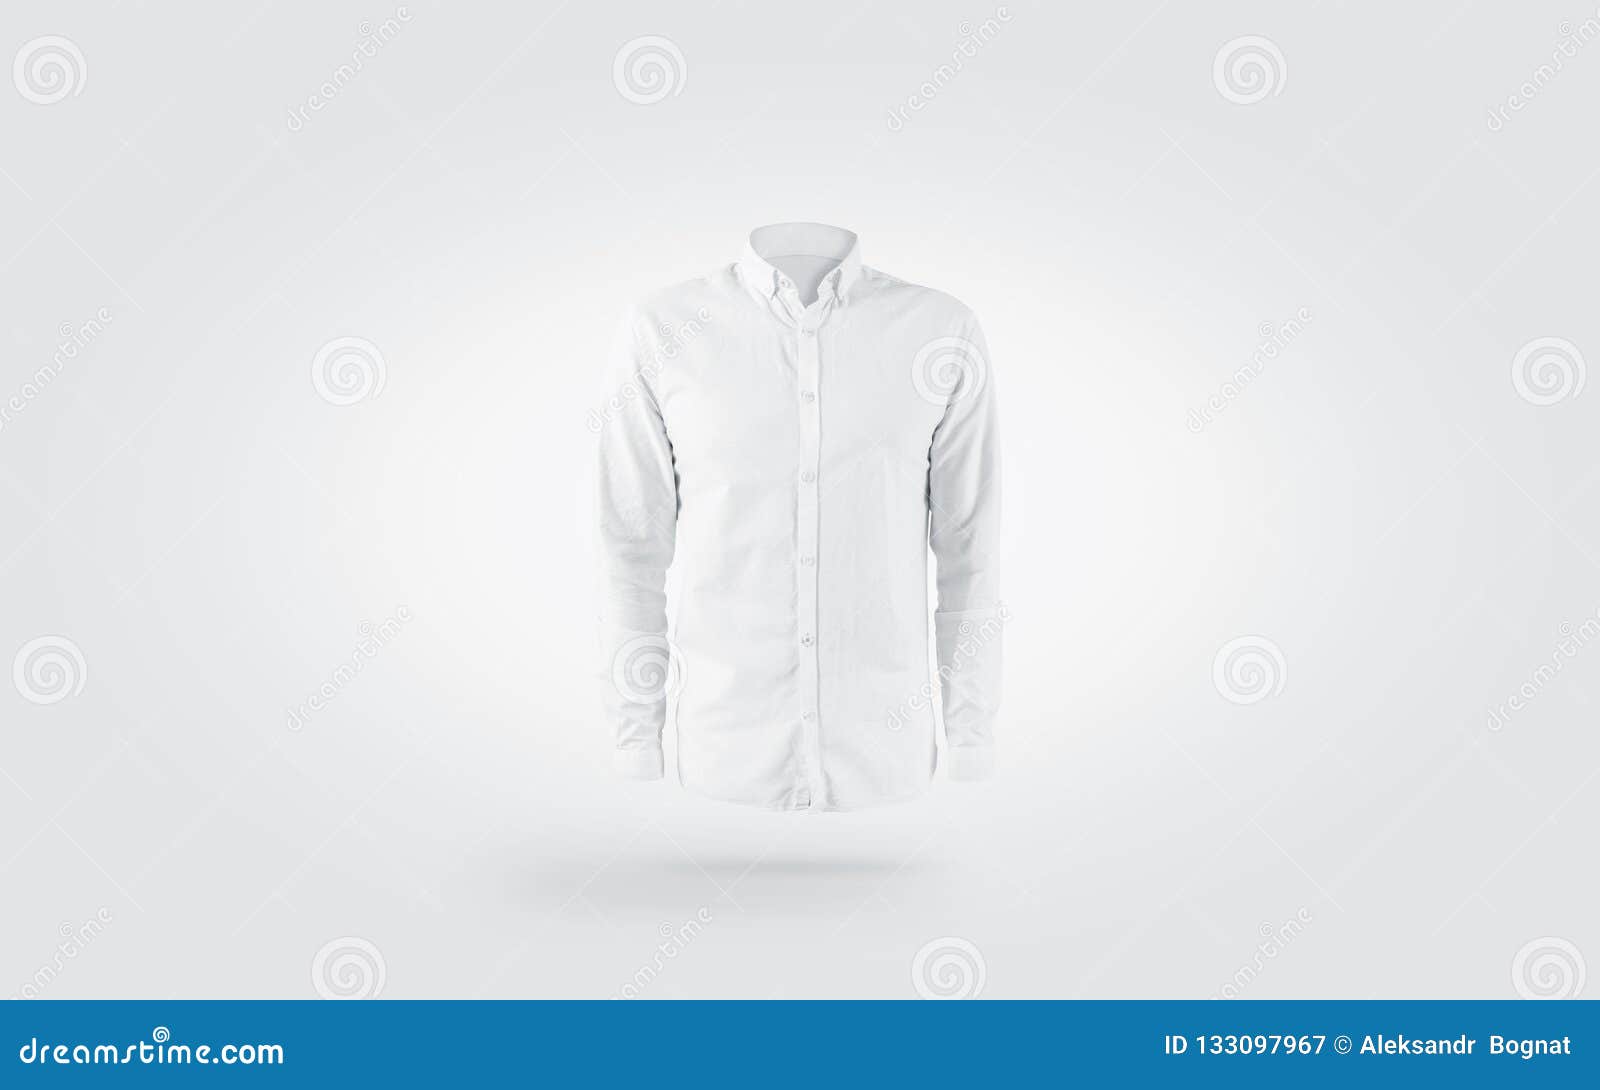 Download Blank White Weared Classic Mens Shirt Mockup, Isolated ...